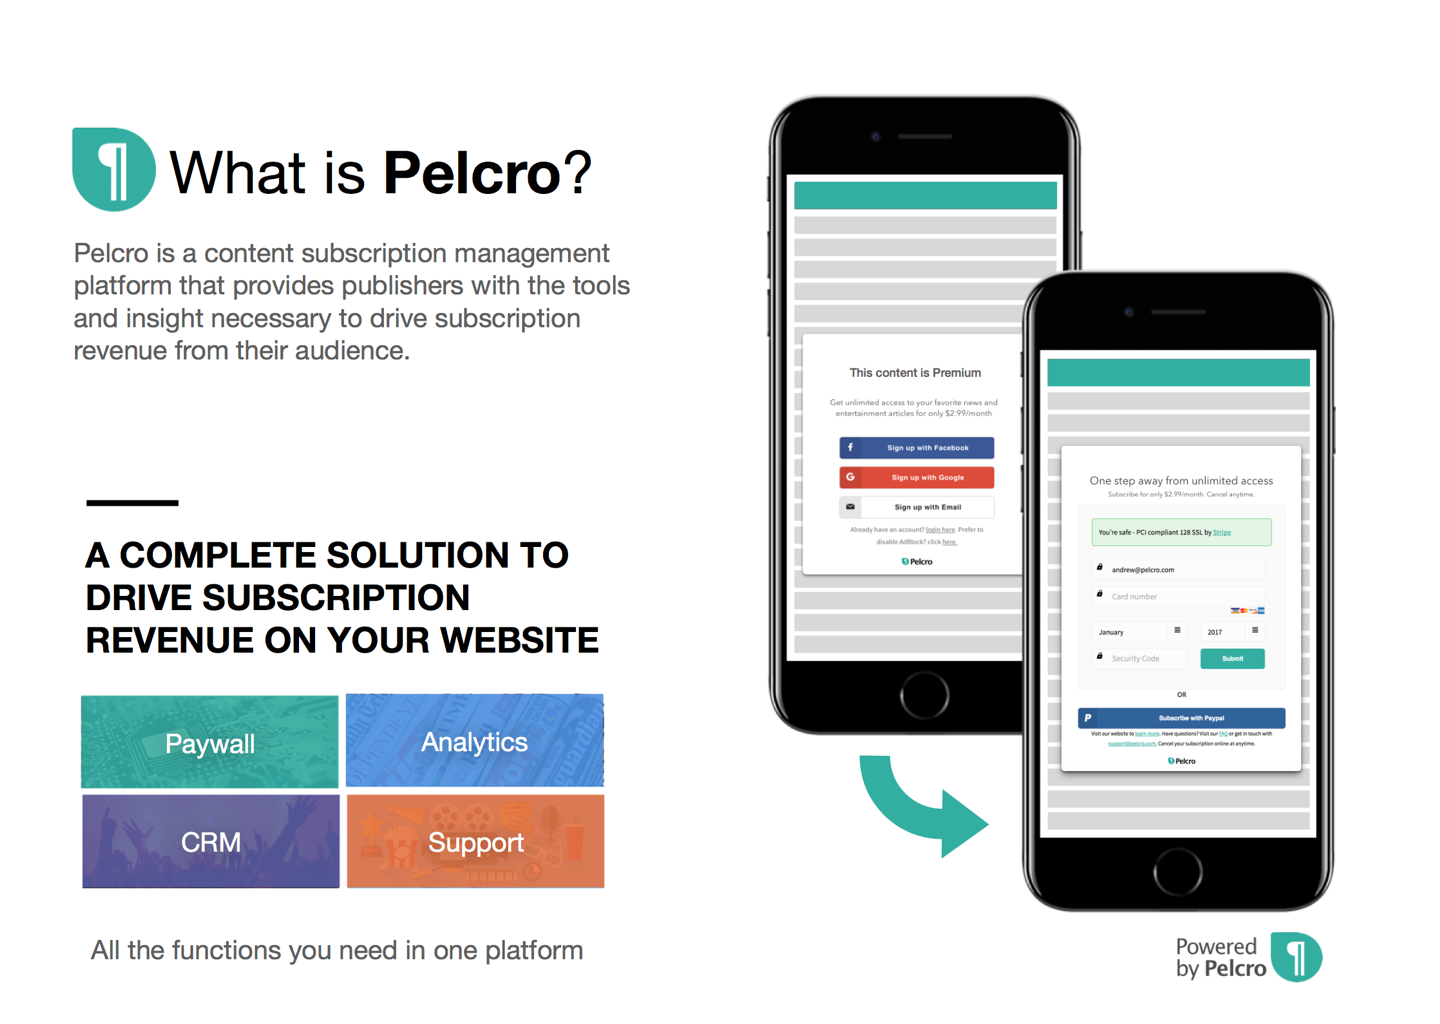 What is pelcro